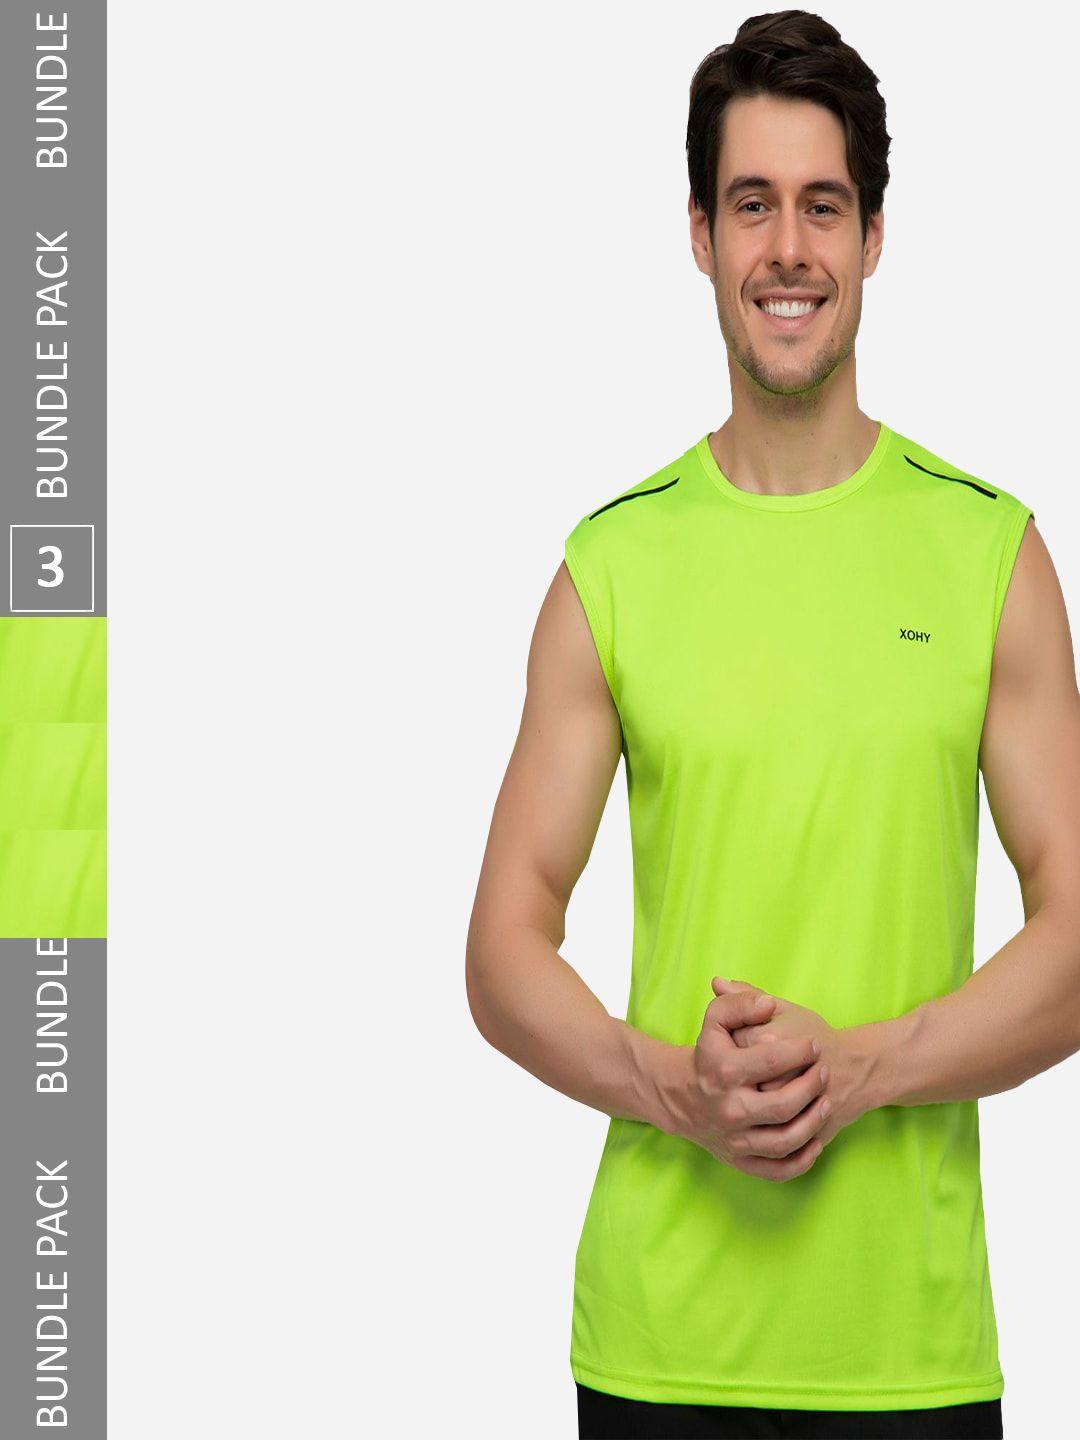 xohy pack of 3 gym vest